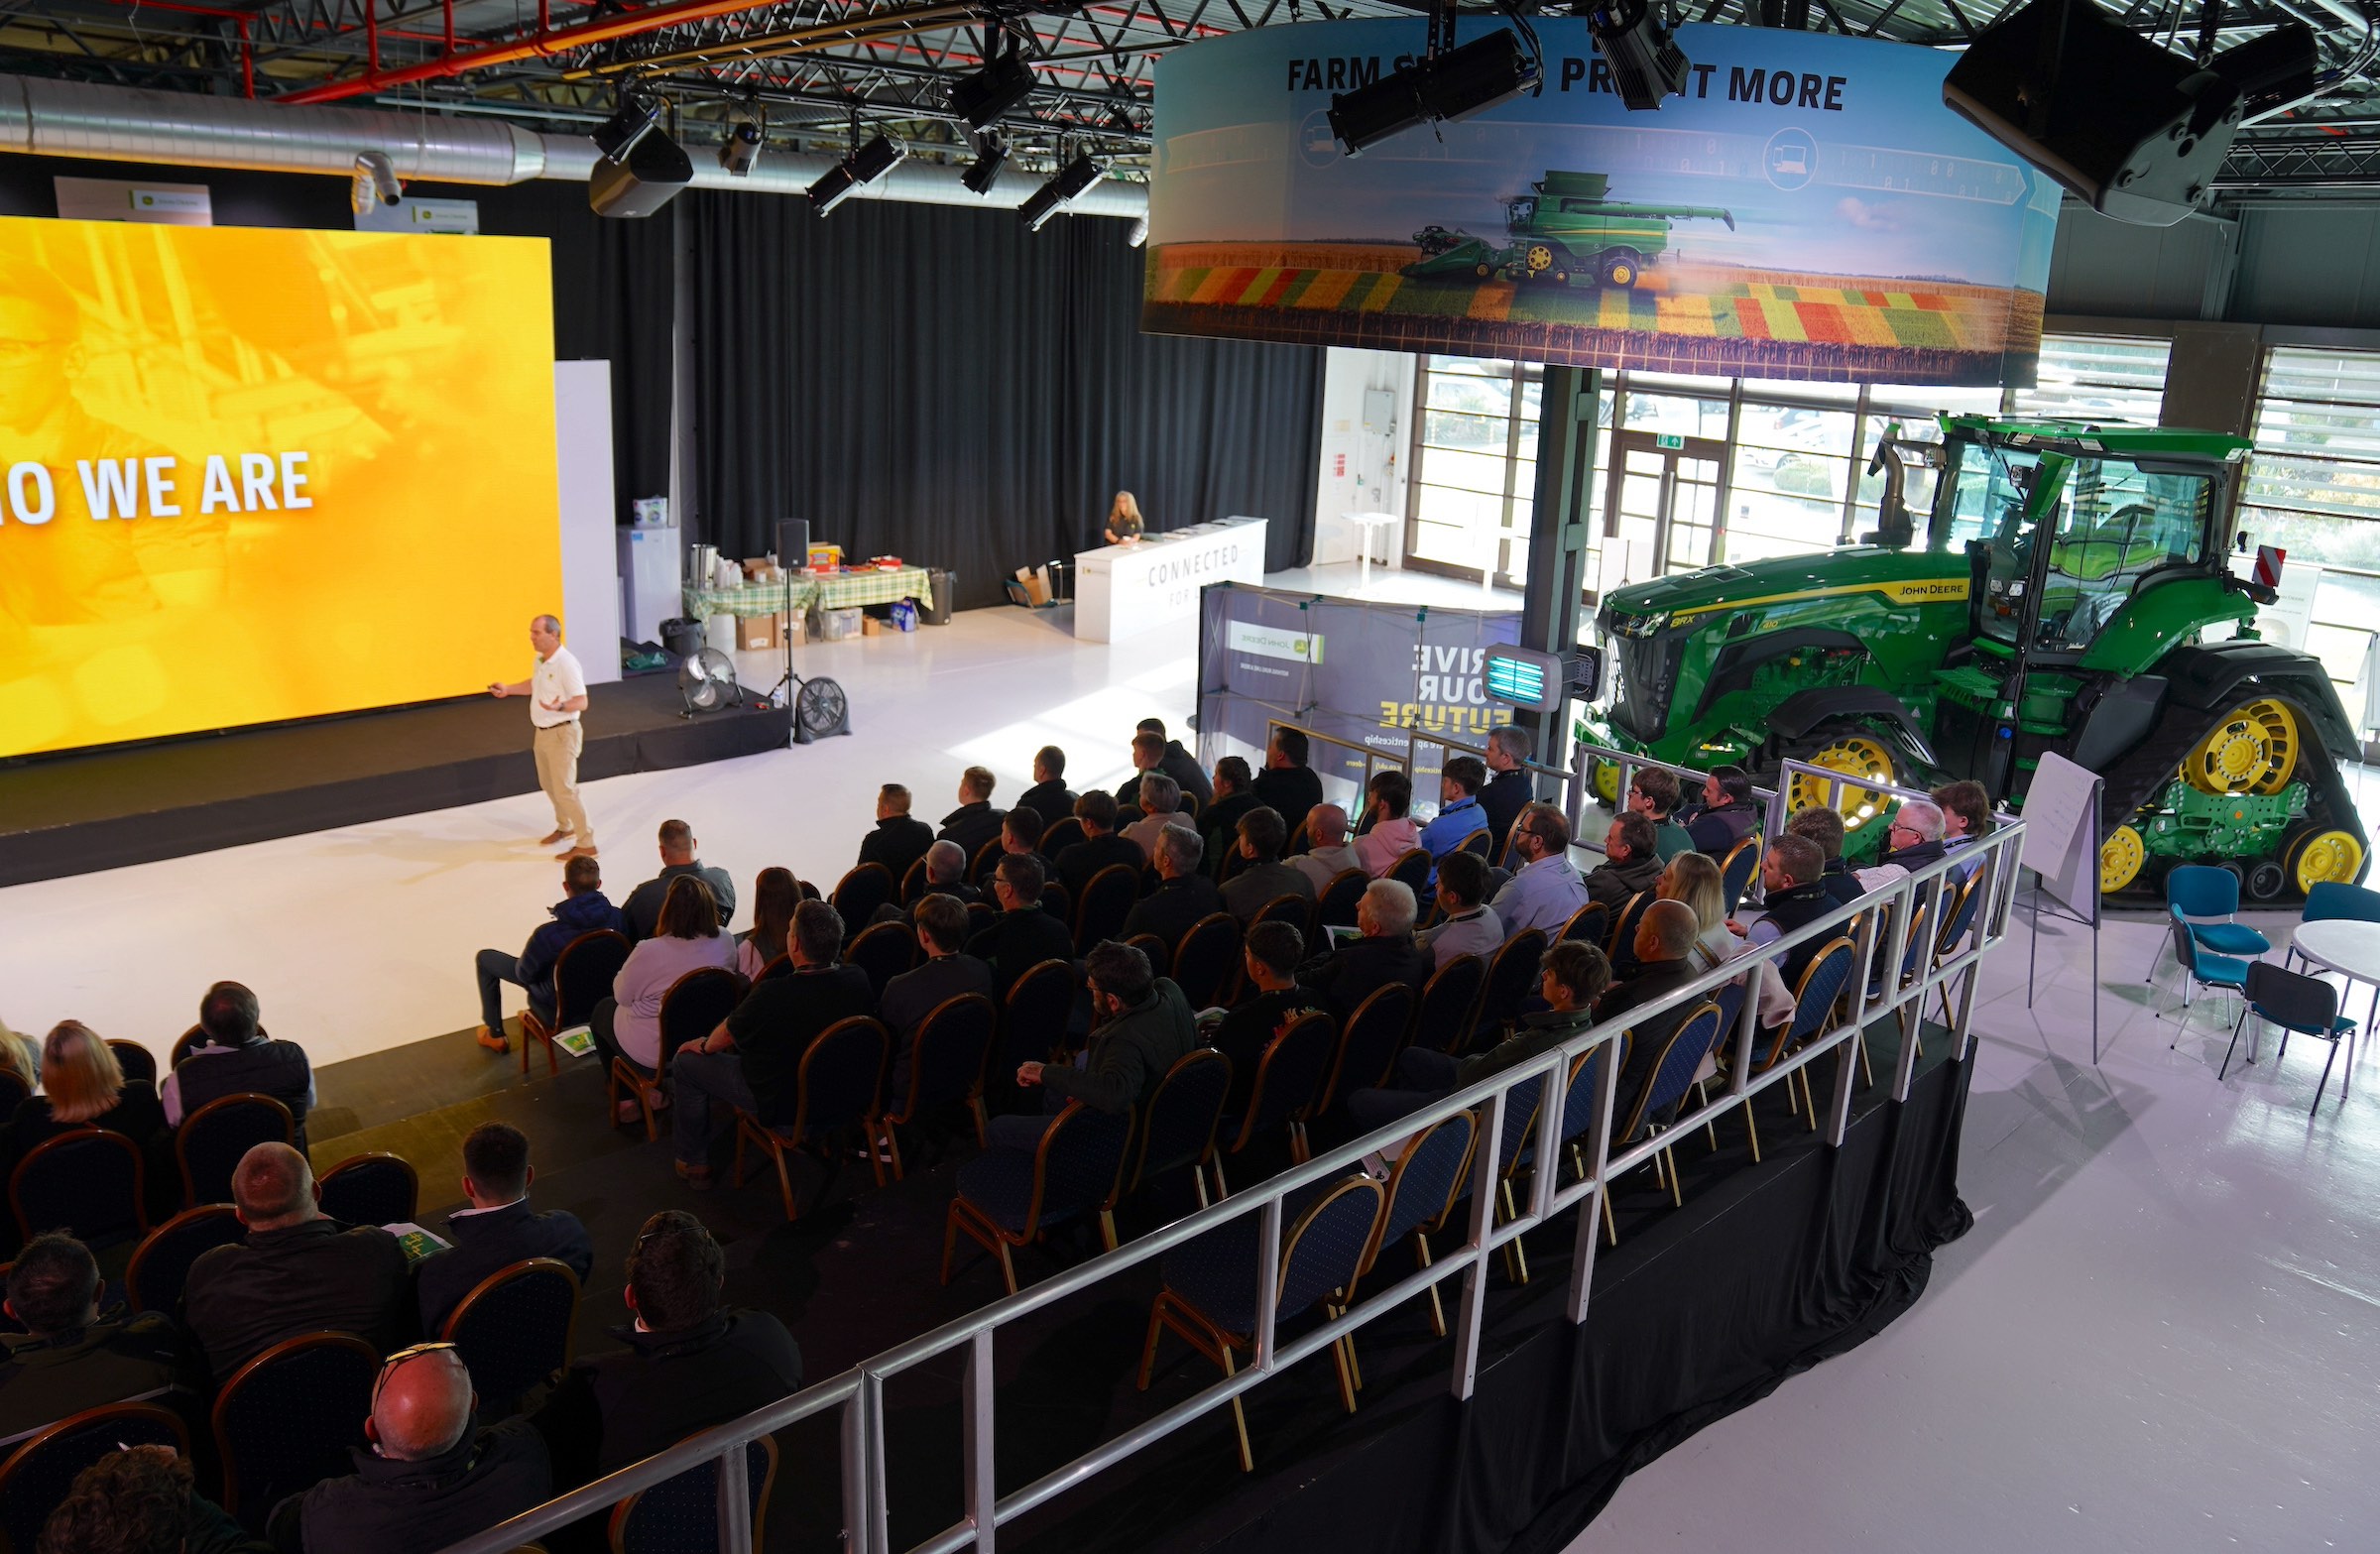 Apprentices, their parents, and dealers attended the induction event at John Deere’s UK headquarters